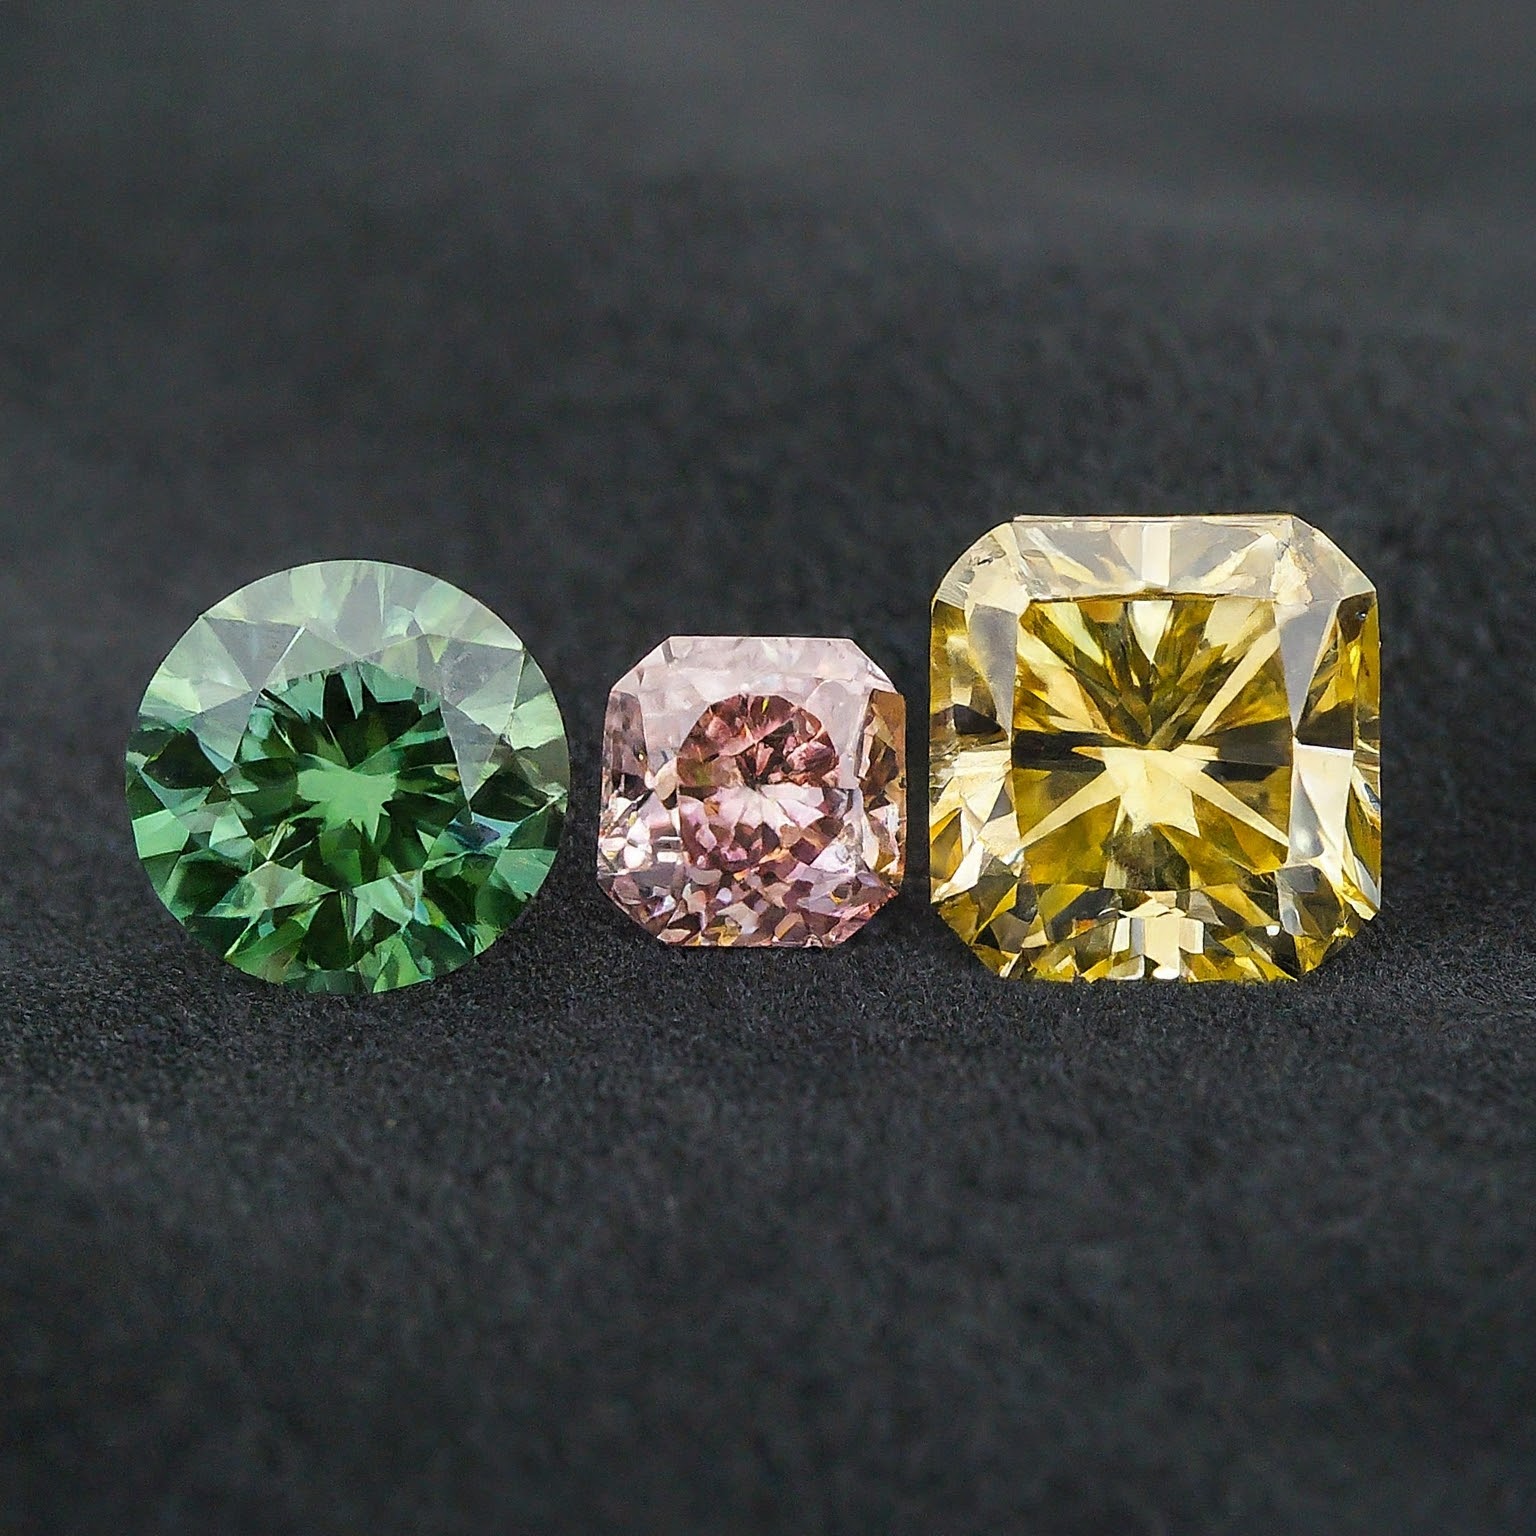 Colours of Natural diamonds